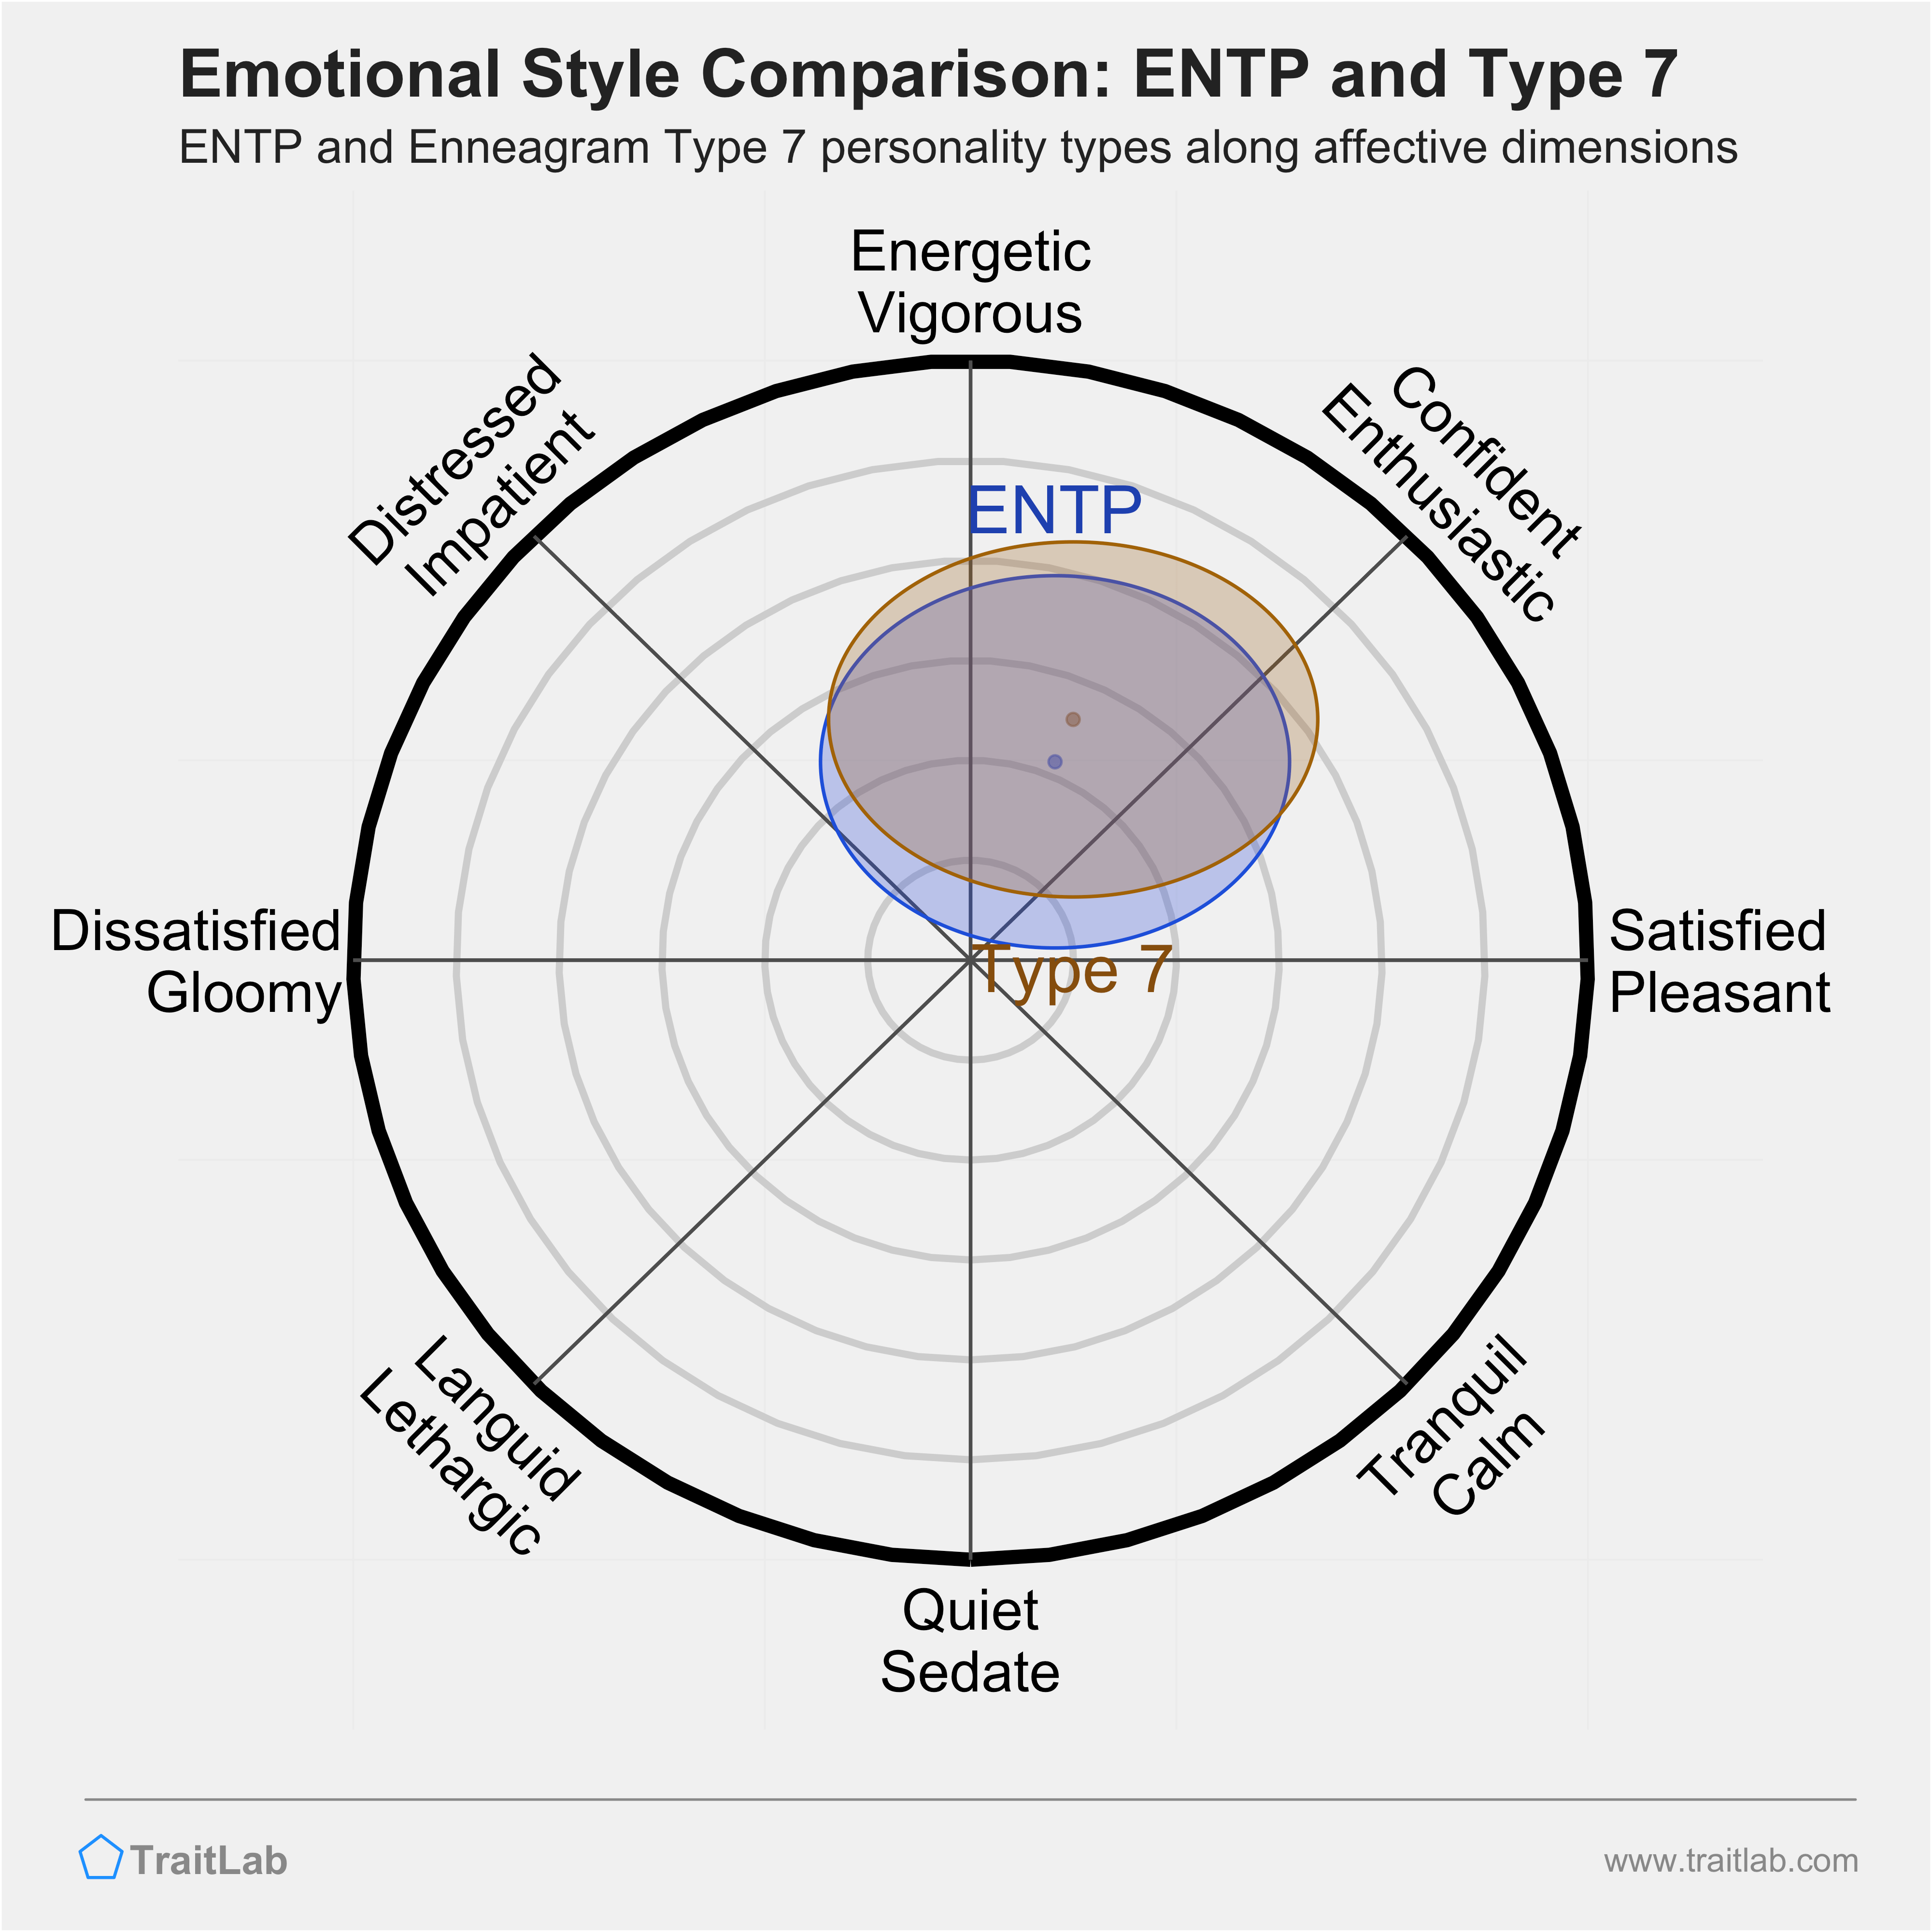 ENTP and Type 7 comparison across emotional (affective) dimensions